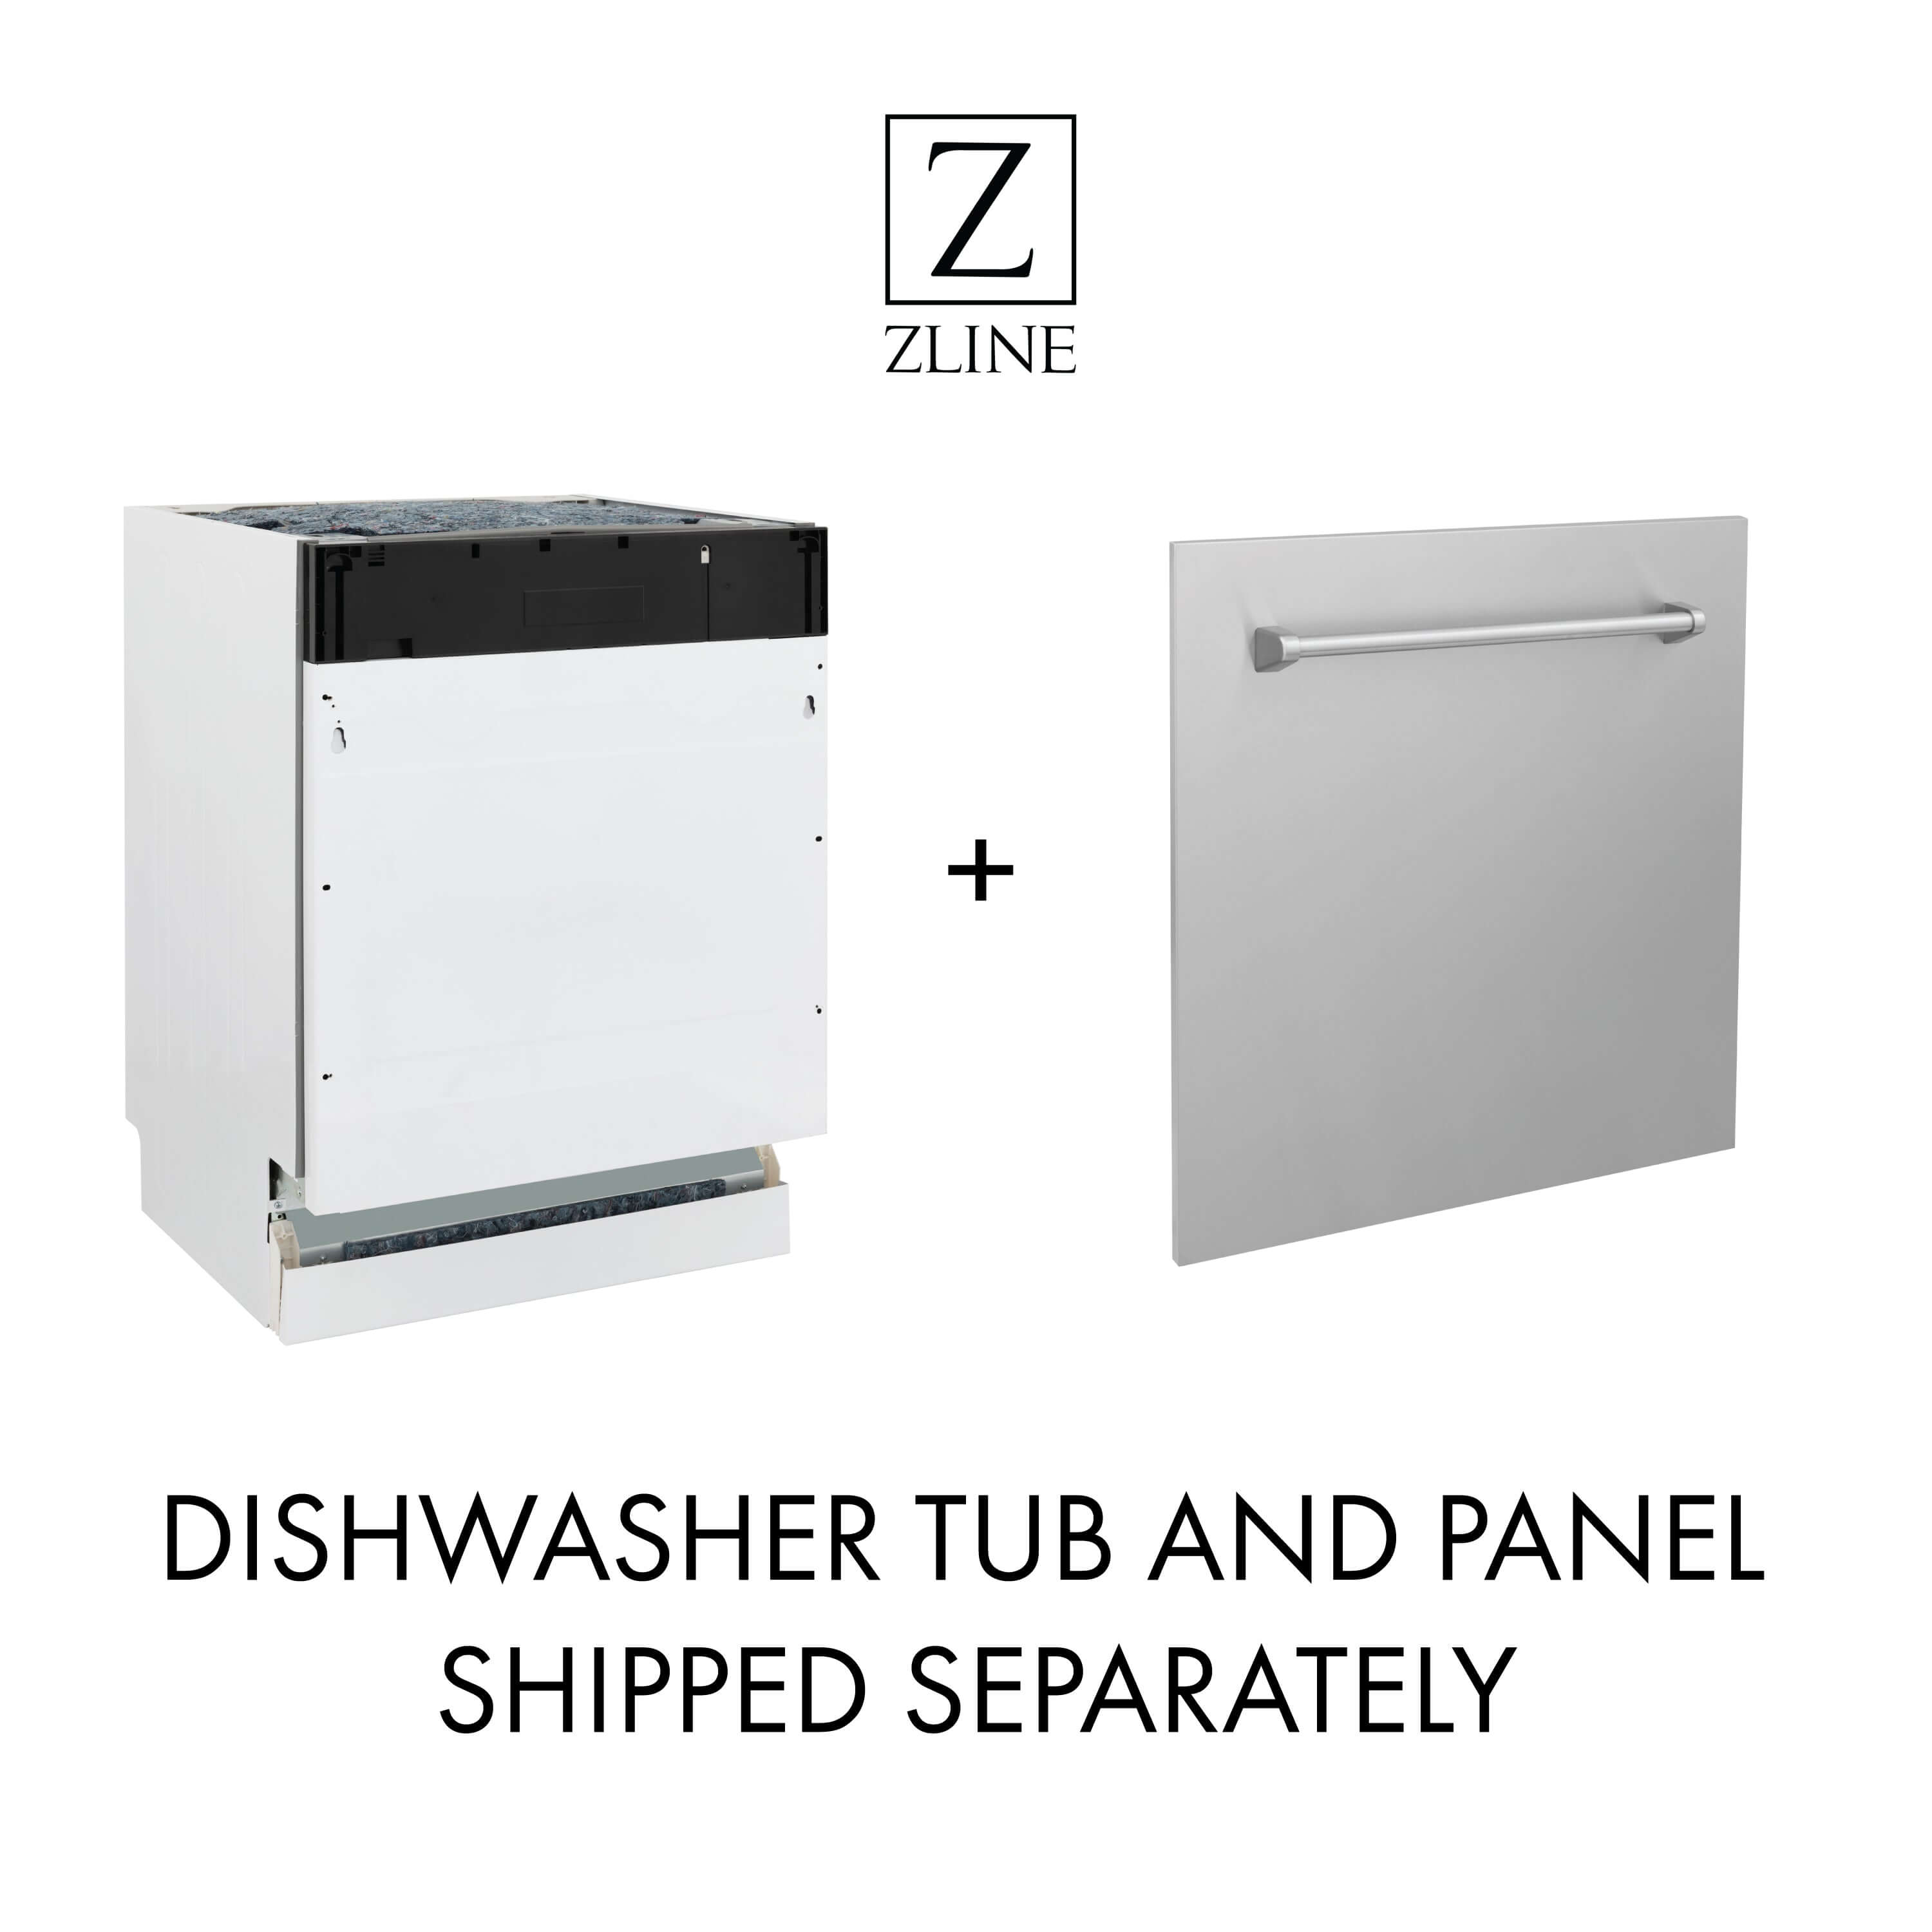 ZLINE Autograph Edition 18 in. Tallac Series 3rd Rack Top Control Built-In Dishwasher in Fingerprint Resistant Stainless Steel with Polished Gold Handle, 51dBa (DWVZ-SN-18-G)